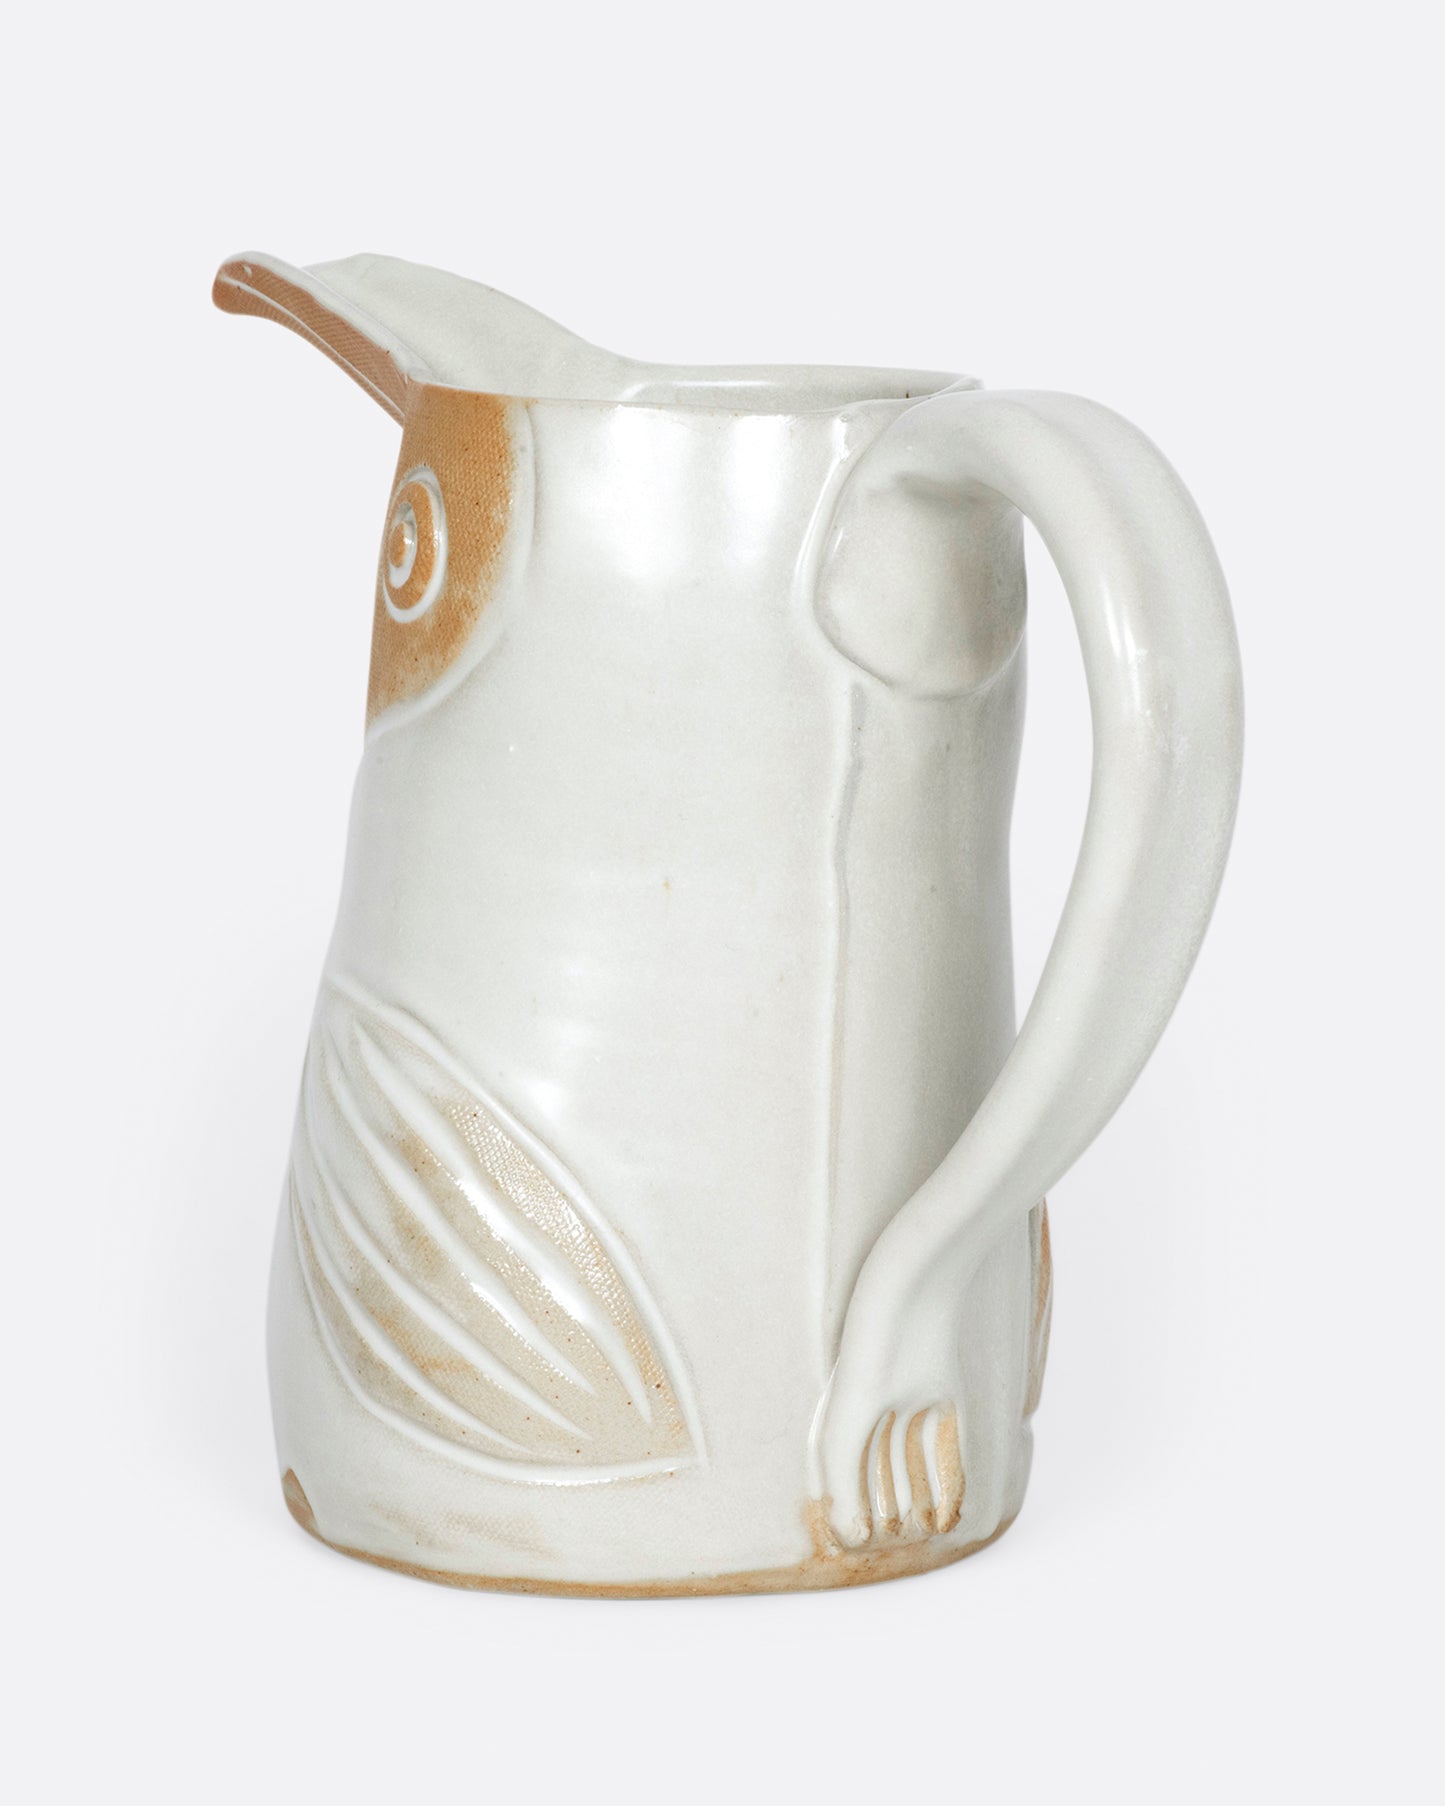 A ceramic pitcher to hold your favorite beverage or flowers.